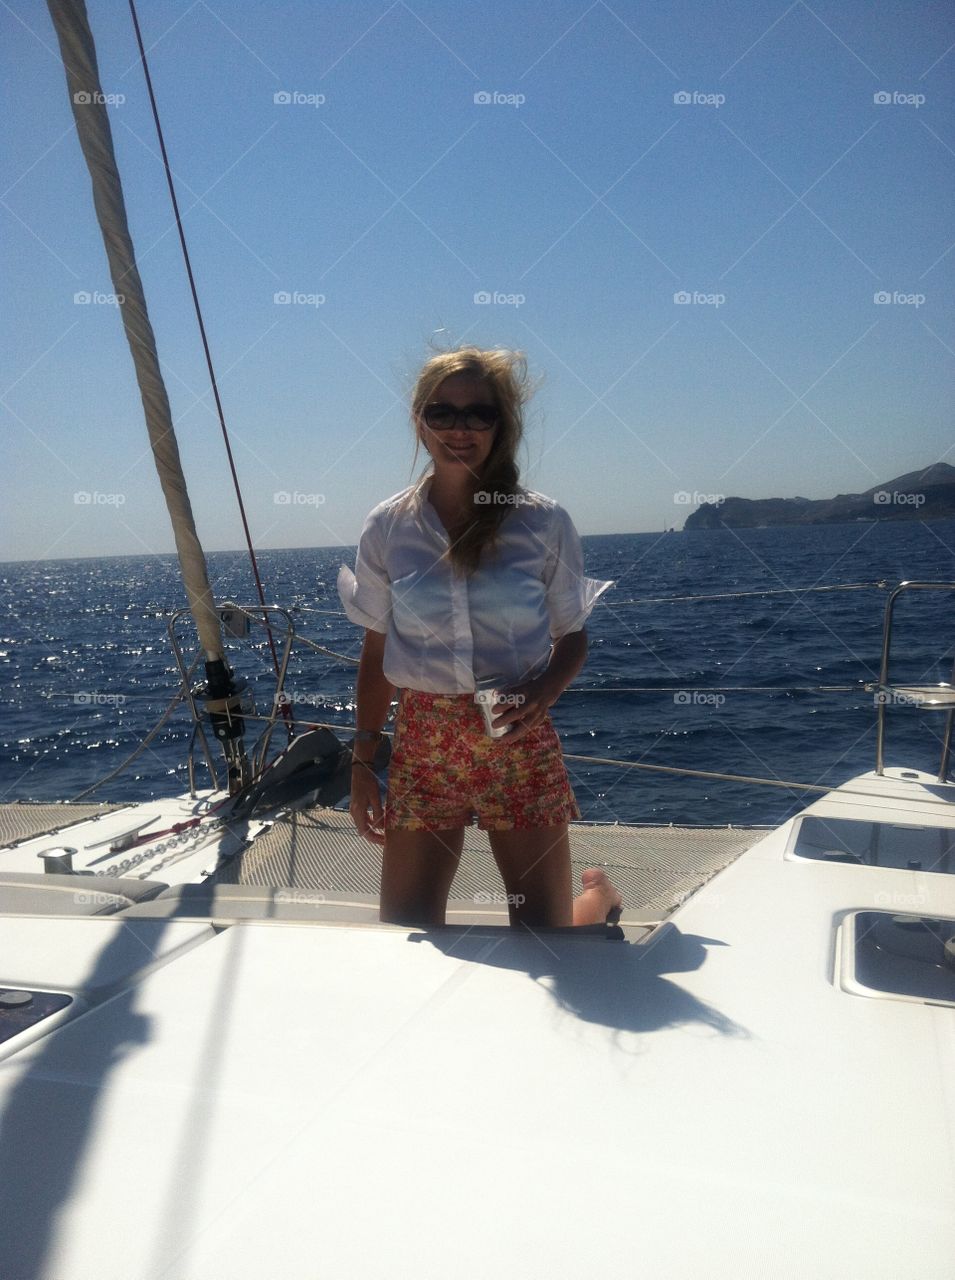 Greek islands yachting!. Gorgeous weather gorgeous scenery 